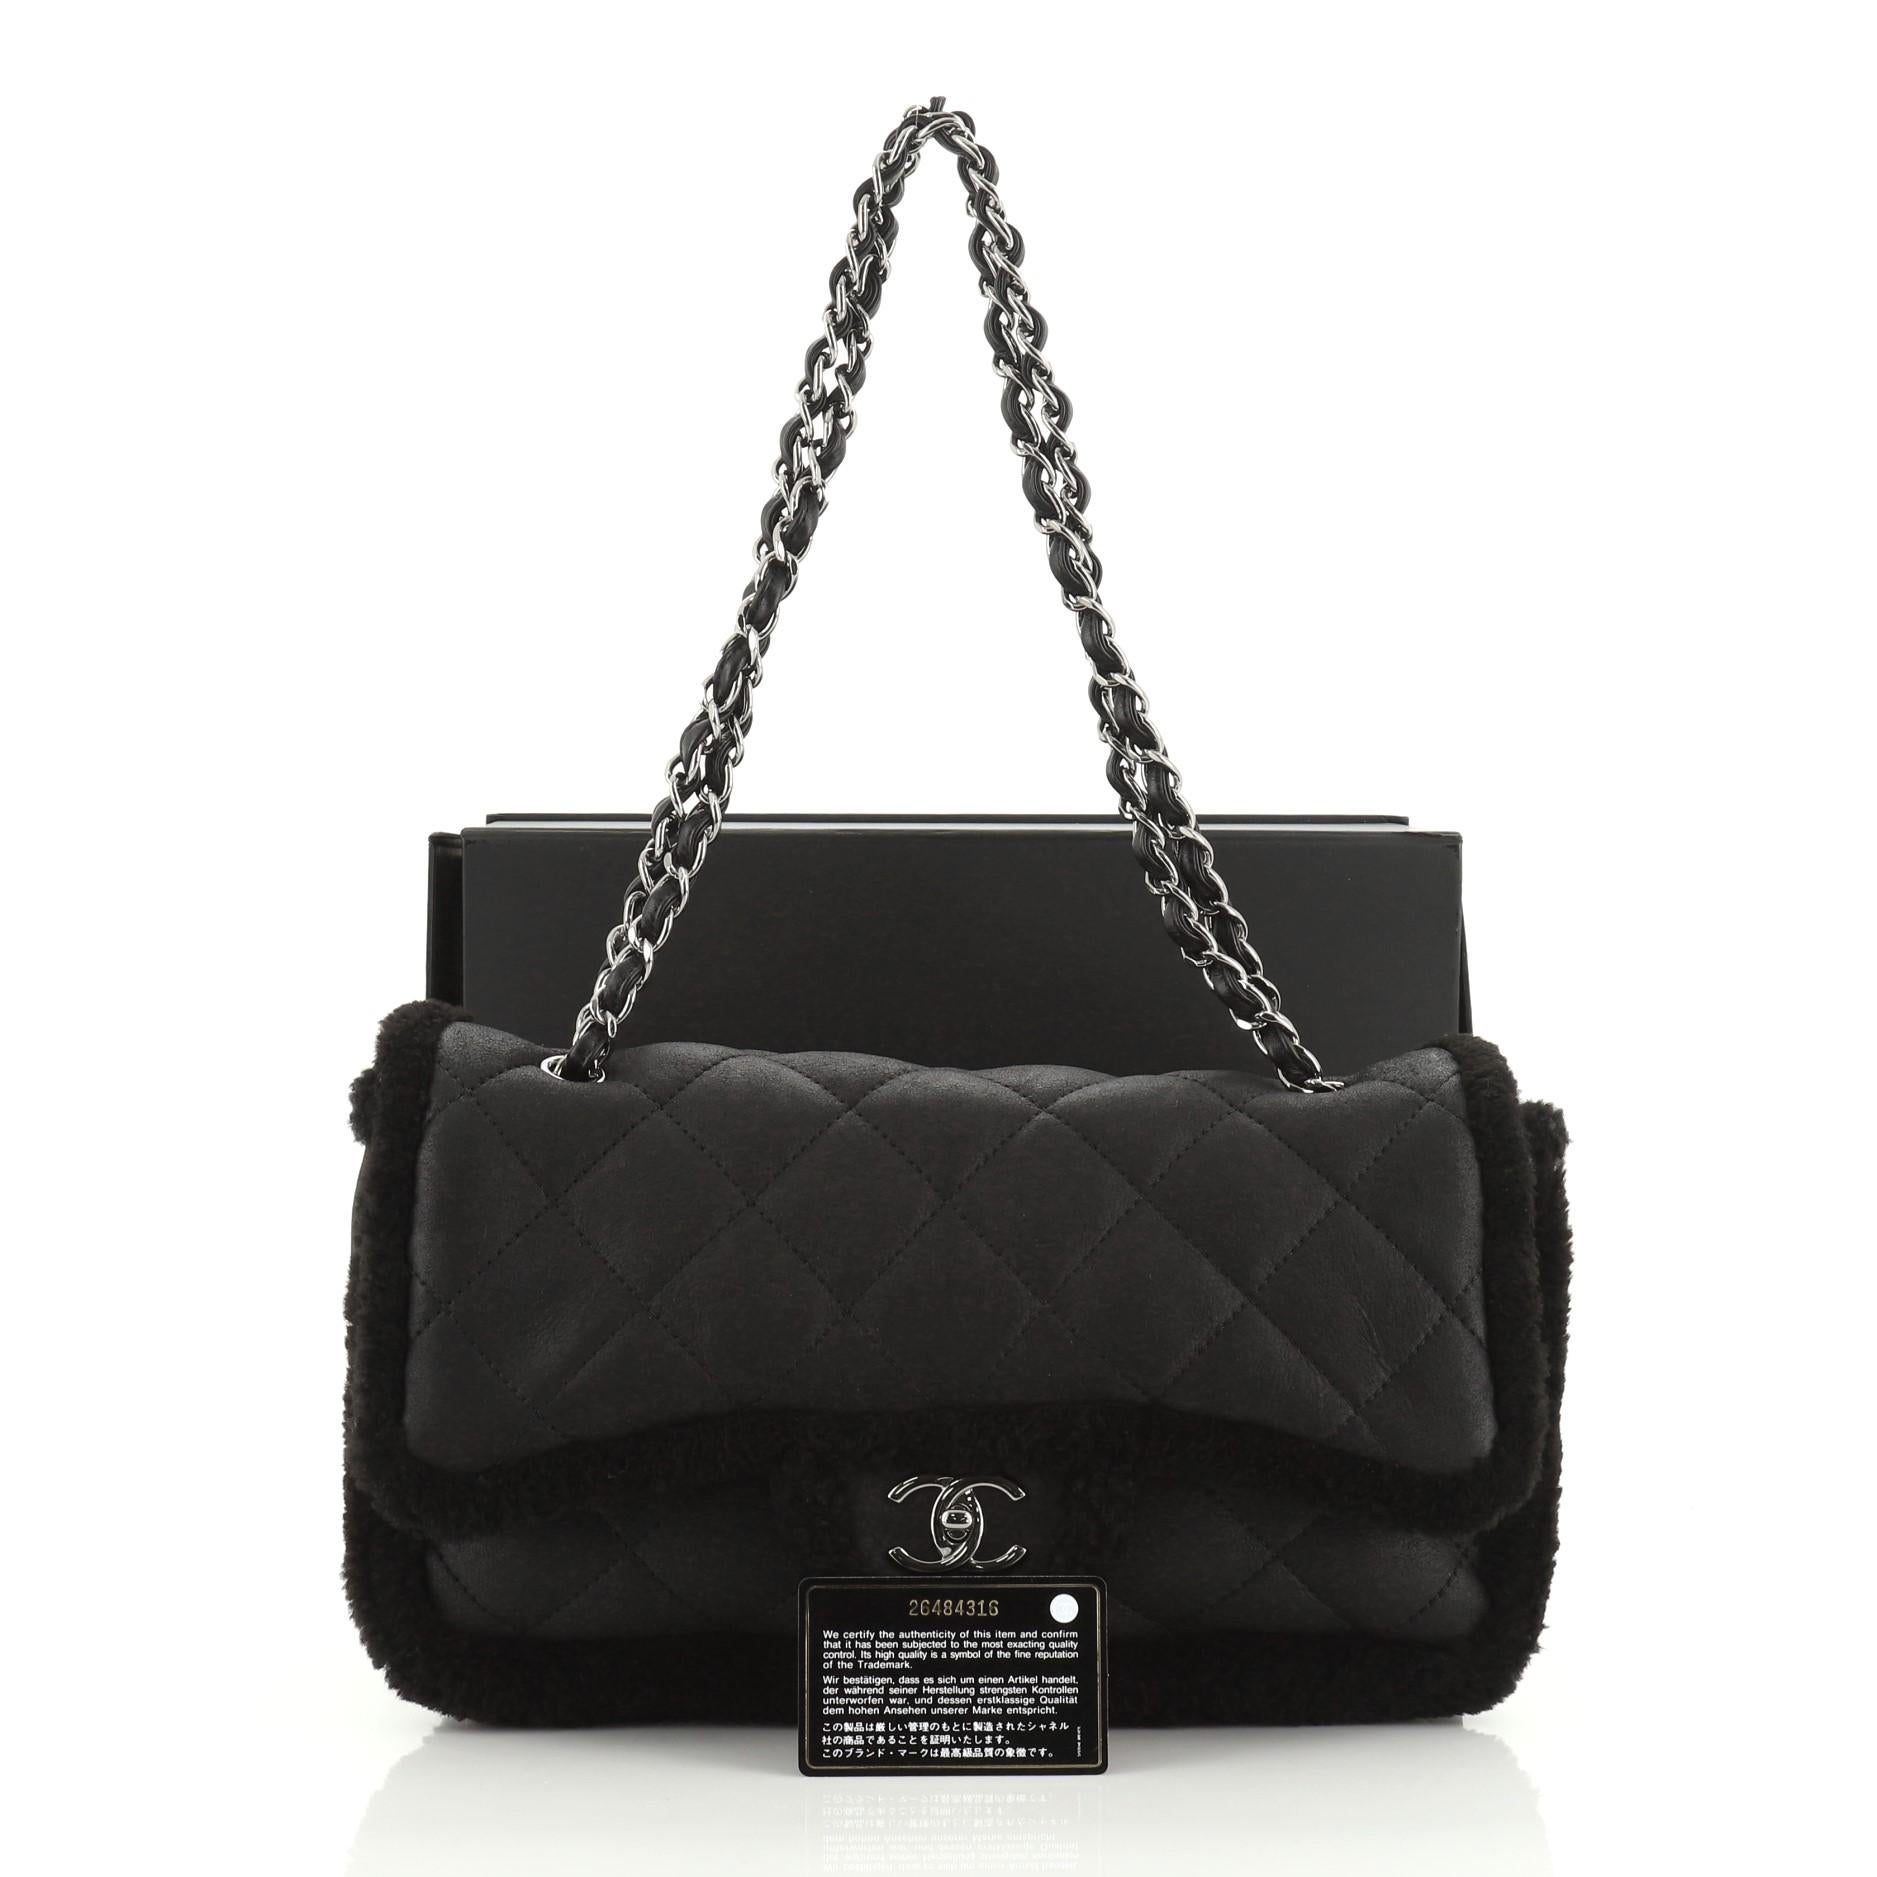 This Chanel Coco Neige Flap Bag Quilted Suede with Shearling Large, crafted in black shearling, features woven-in leather chain link strap and gunmetal-tone hardware. Its CC turn-lock closure opens to a black leather and shearling interior with side